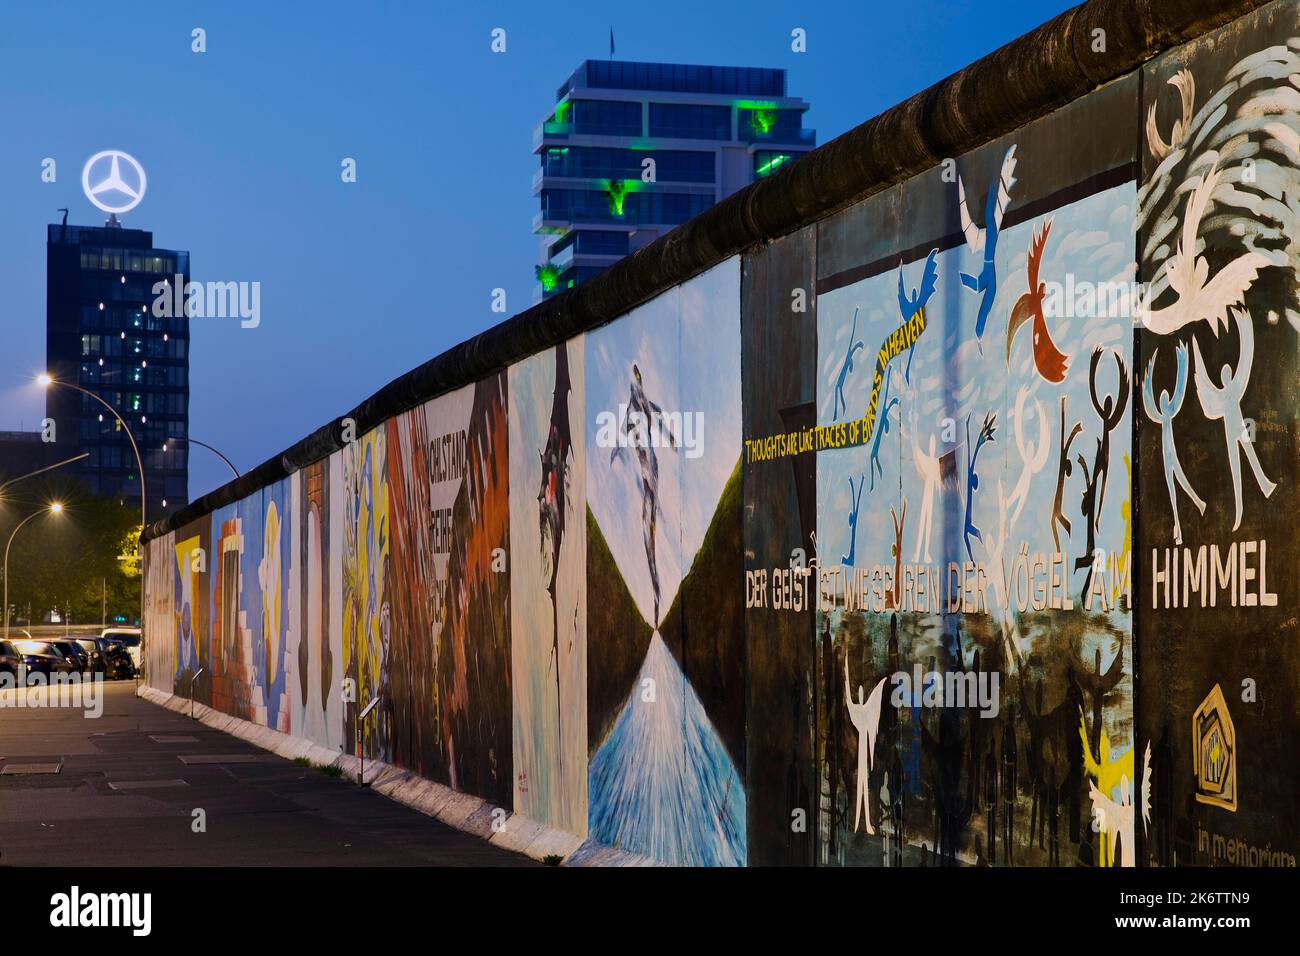 Mural on the Berlin Wall with Mercedes star, Berlin, Germany, East Side Gallery in the blue hour, Berlin, Germany Stock Photo